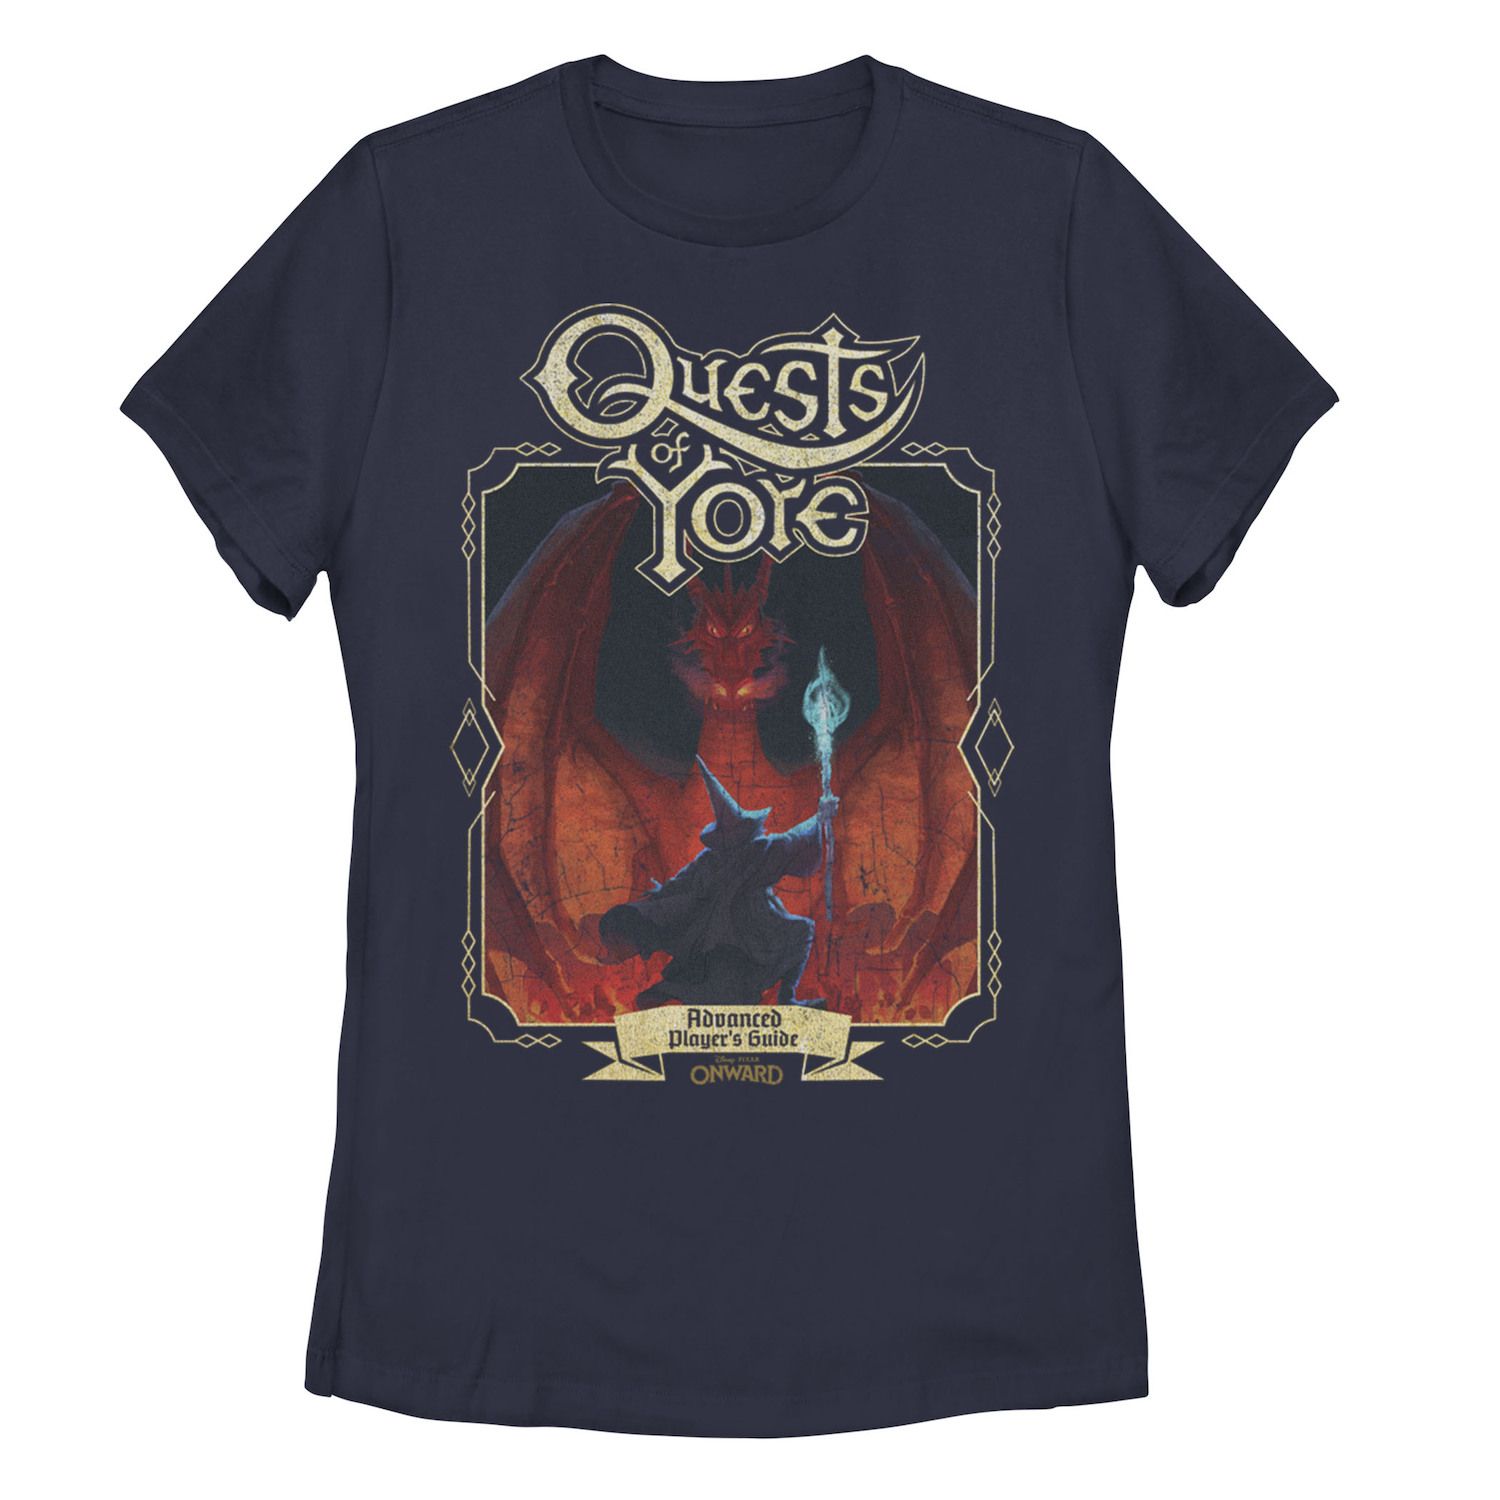 Image for Disney / Pixar Juniors' Onward Quests Of Yore Advanced Player's Guide Graphic Tee at Kohl's.